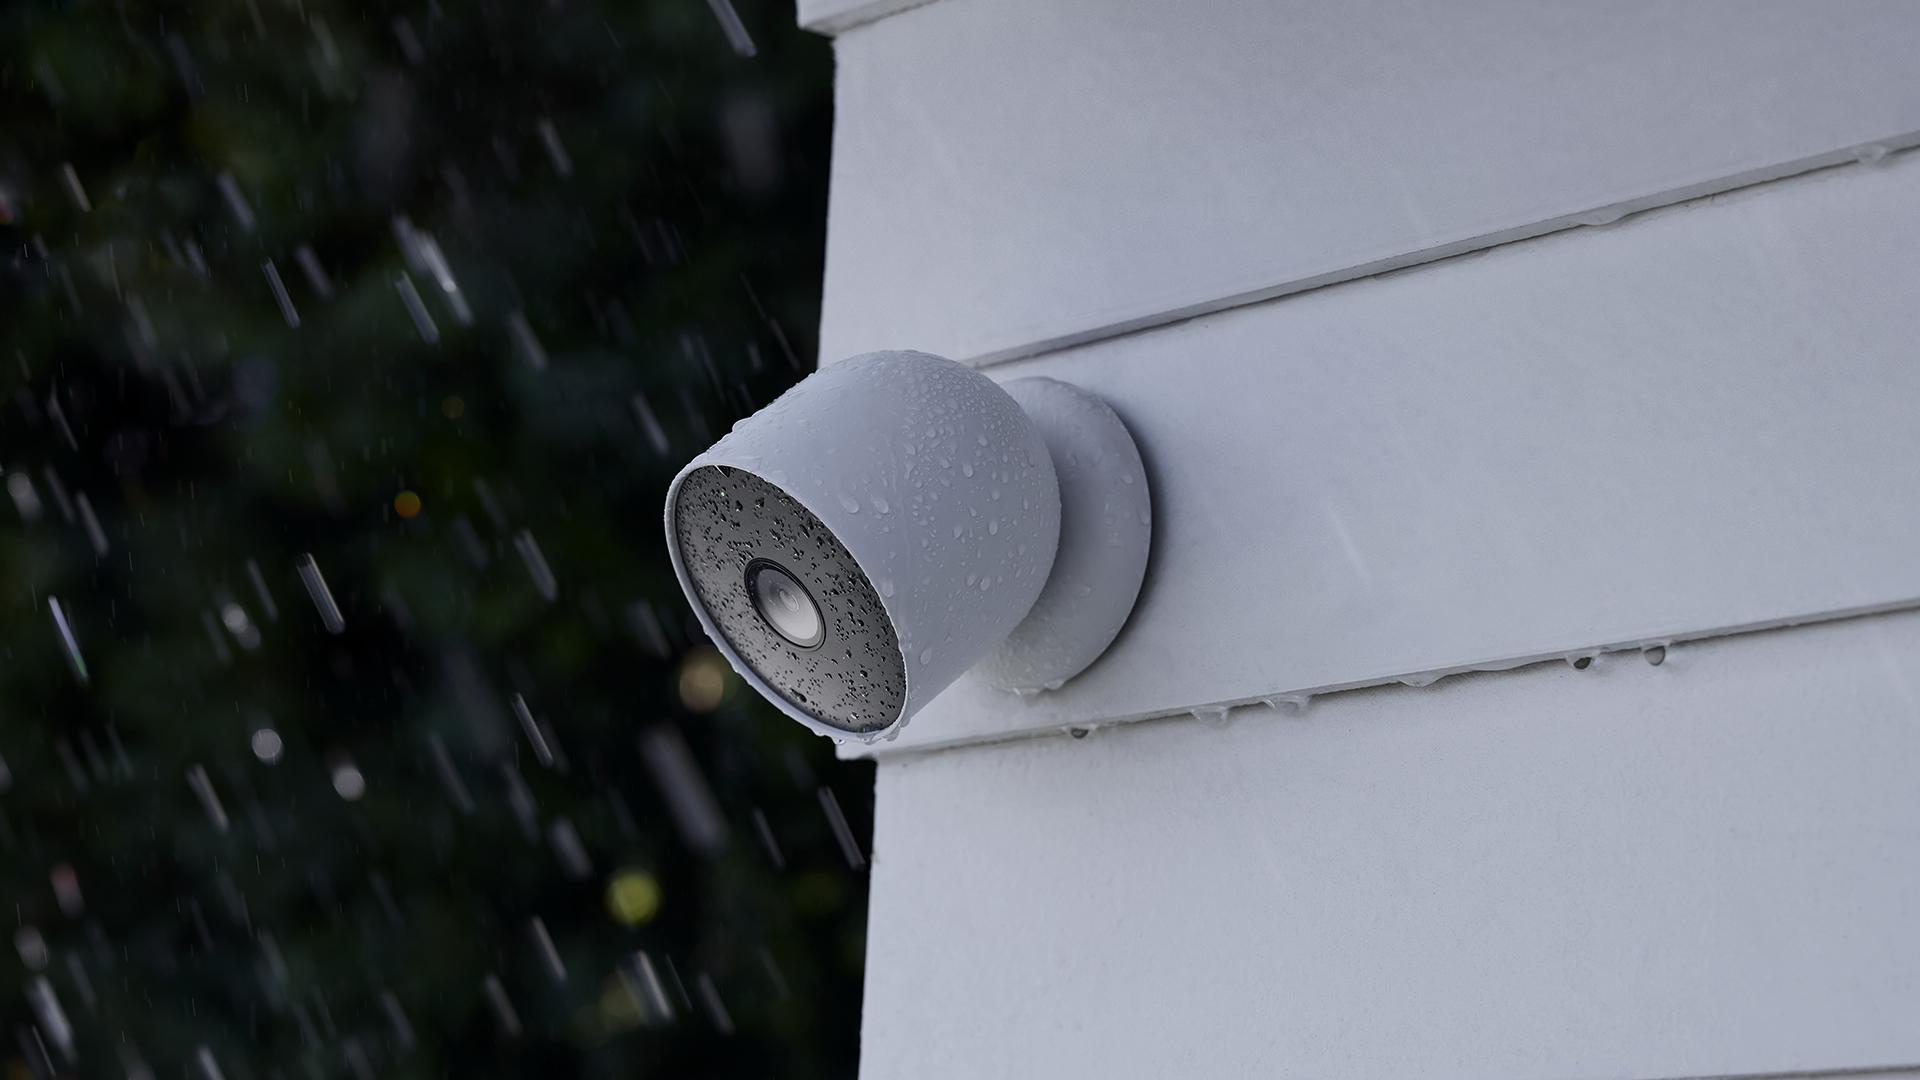 The Nest Cam Battery outdoors in the rain